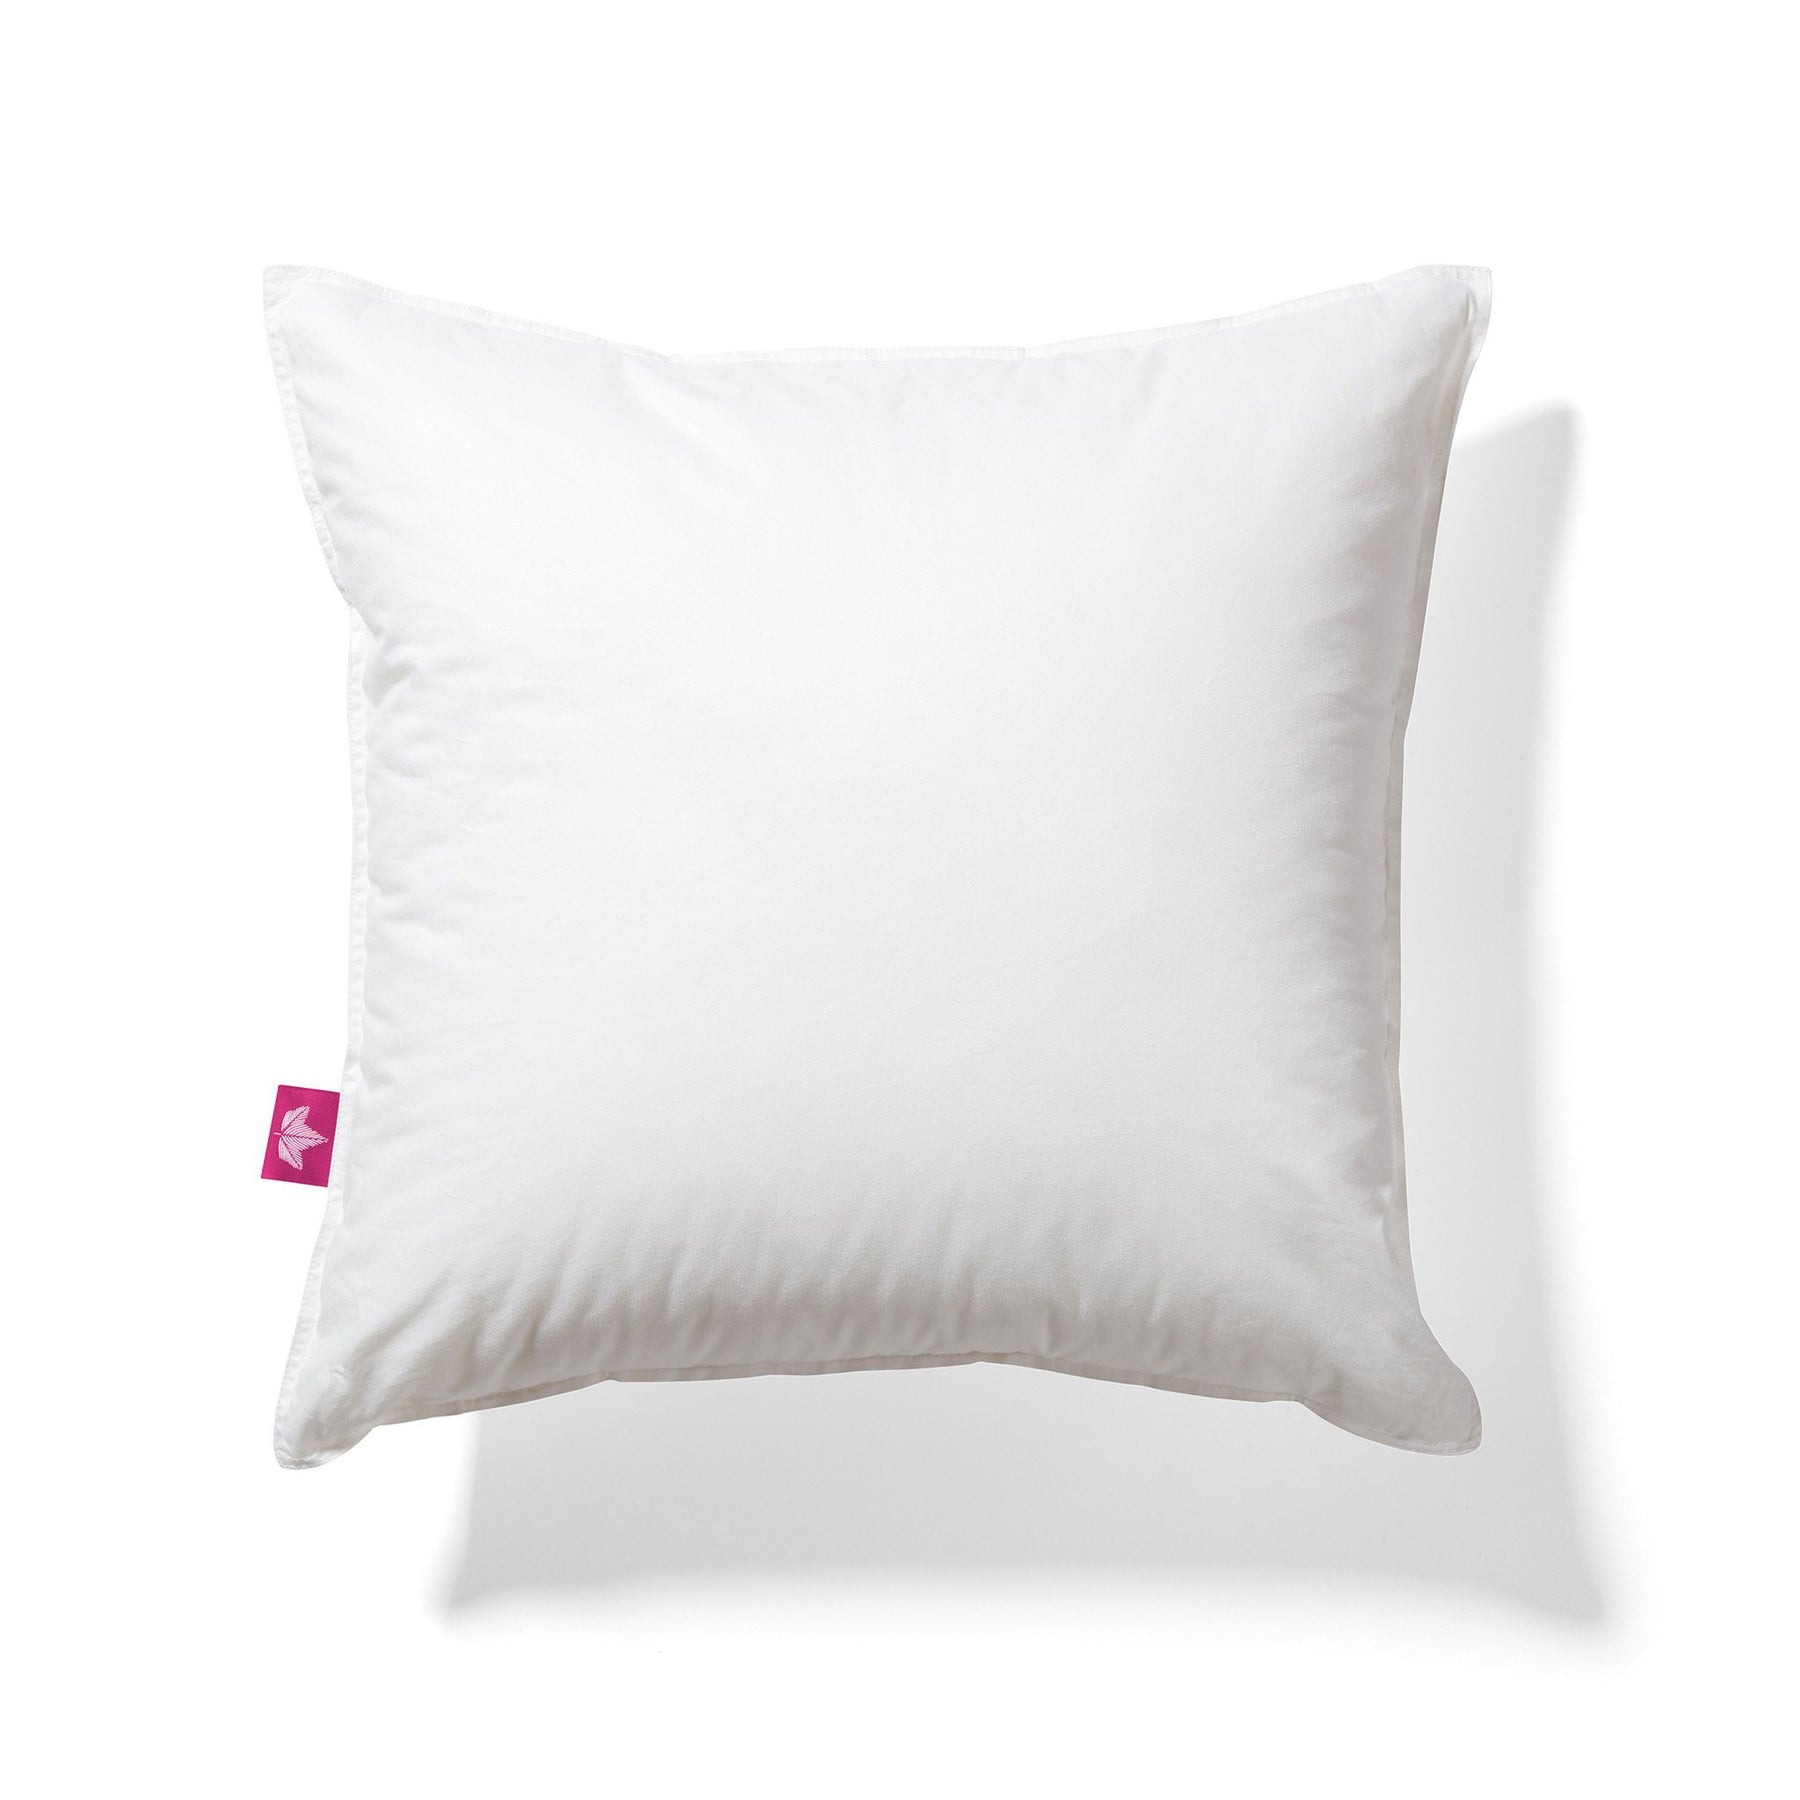 Ethically Sourced Feather Pillow Inserts